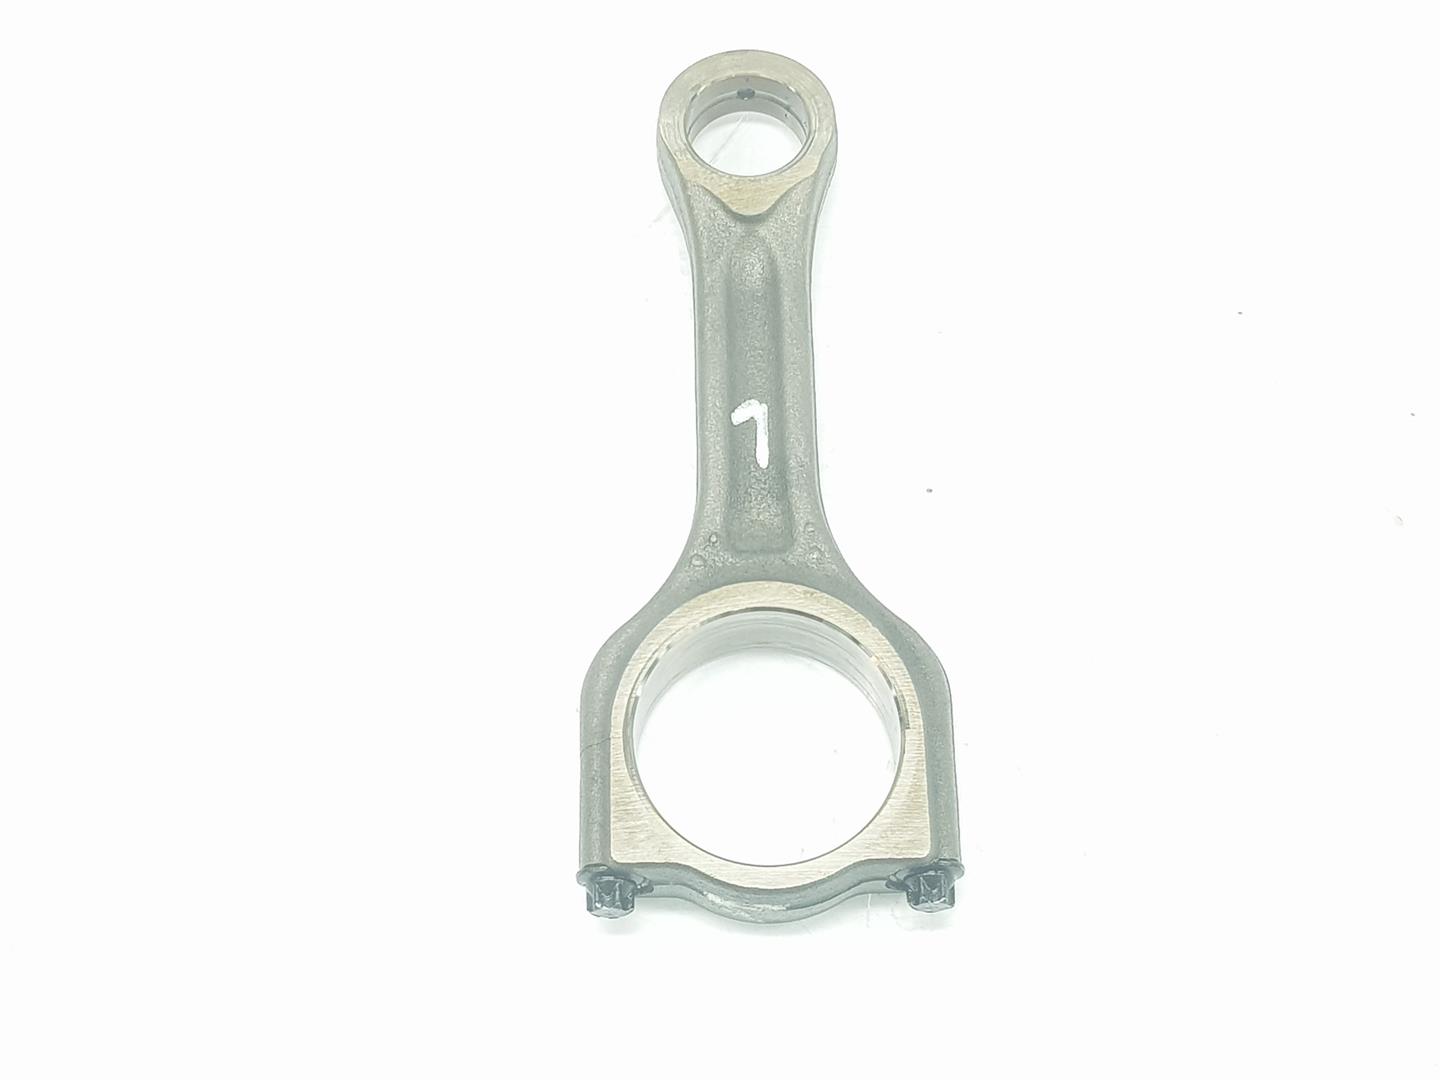 PEUGEOT 308 T7 (2007-2015) Connecting Rod 060392, 060392, 1151CB 24230210